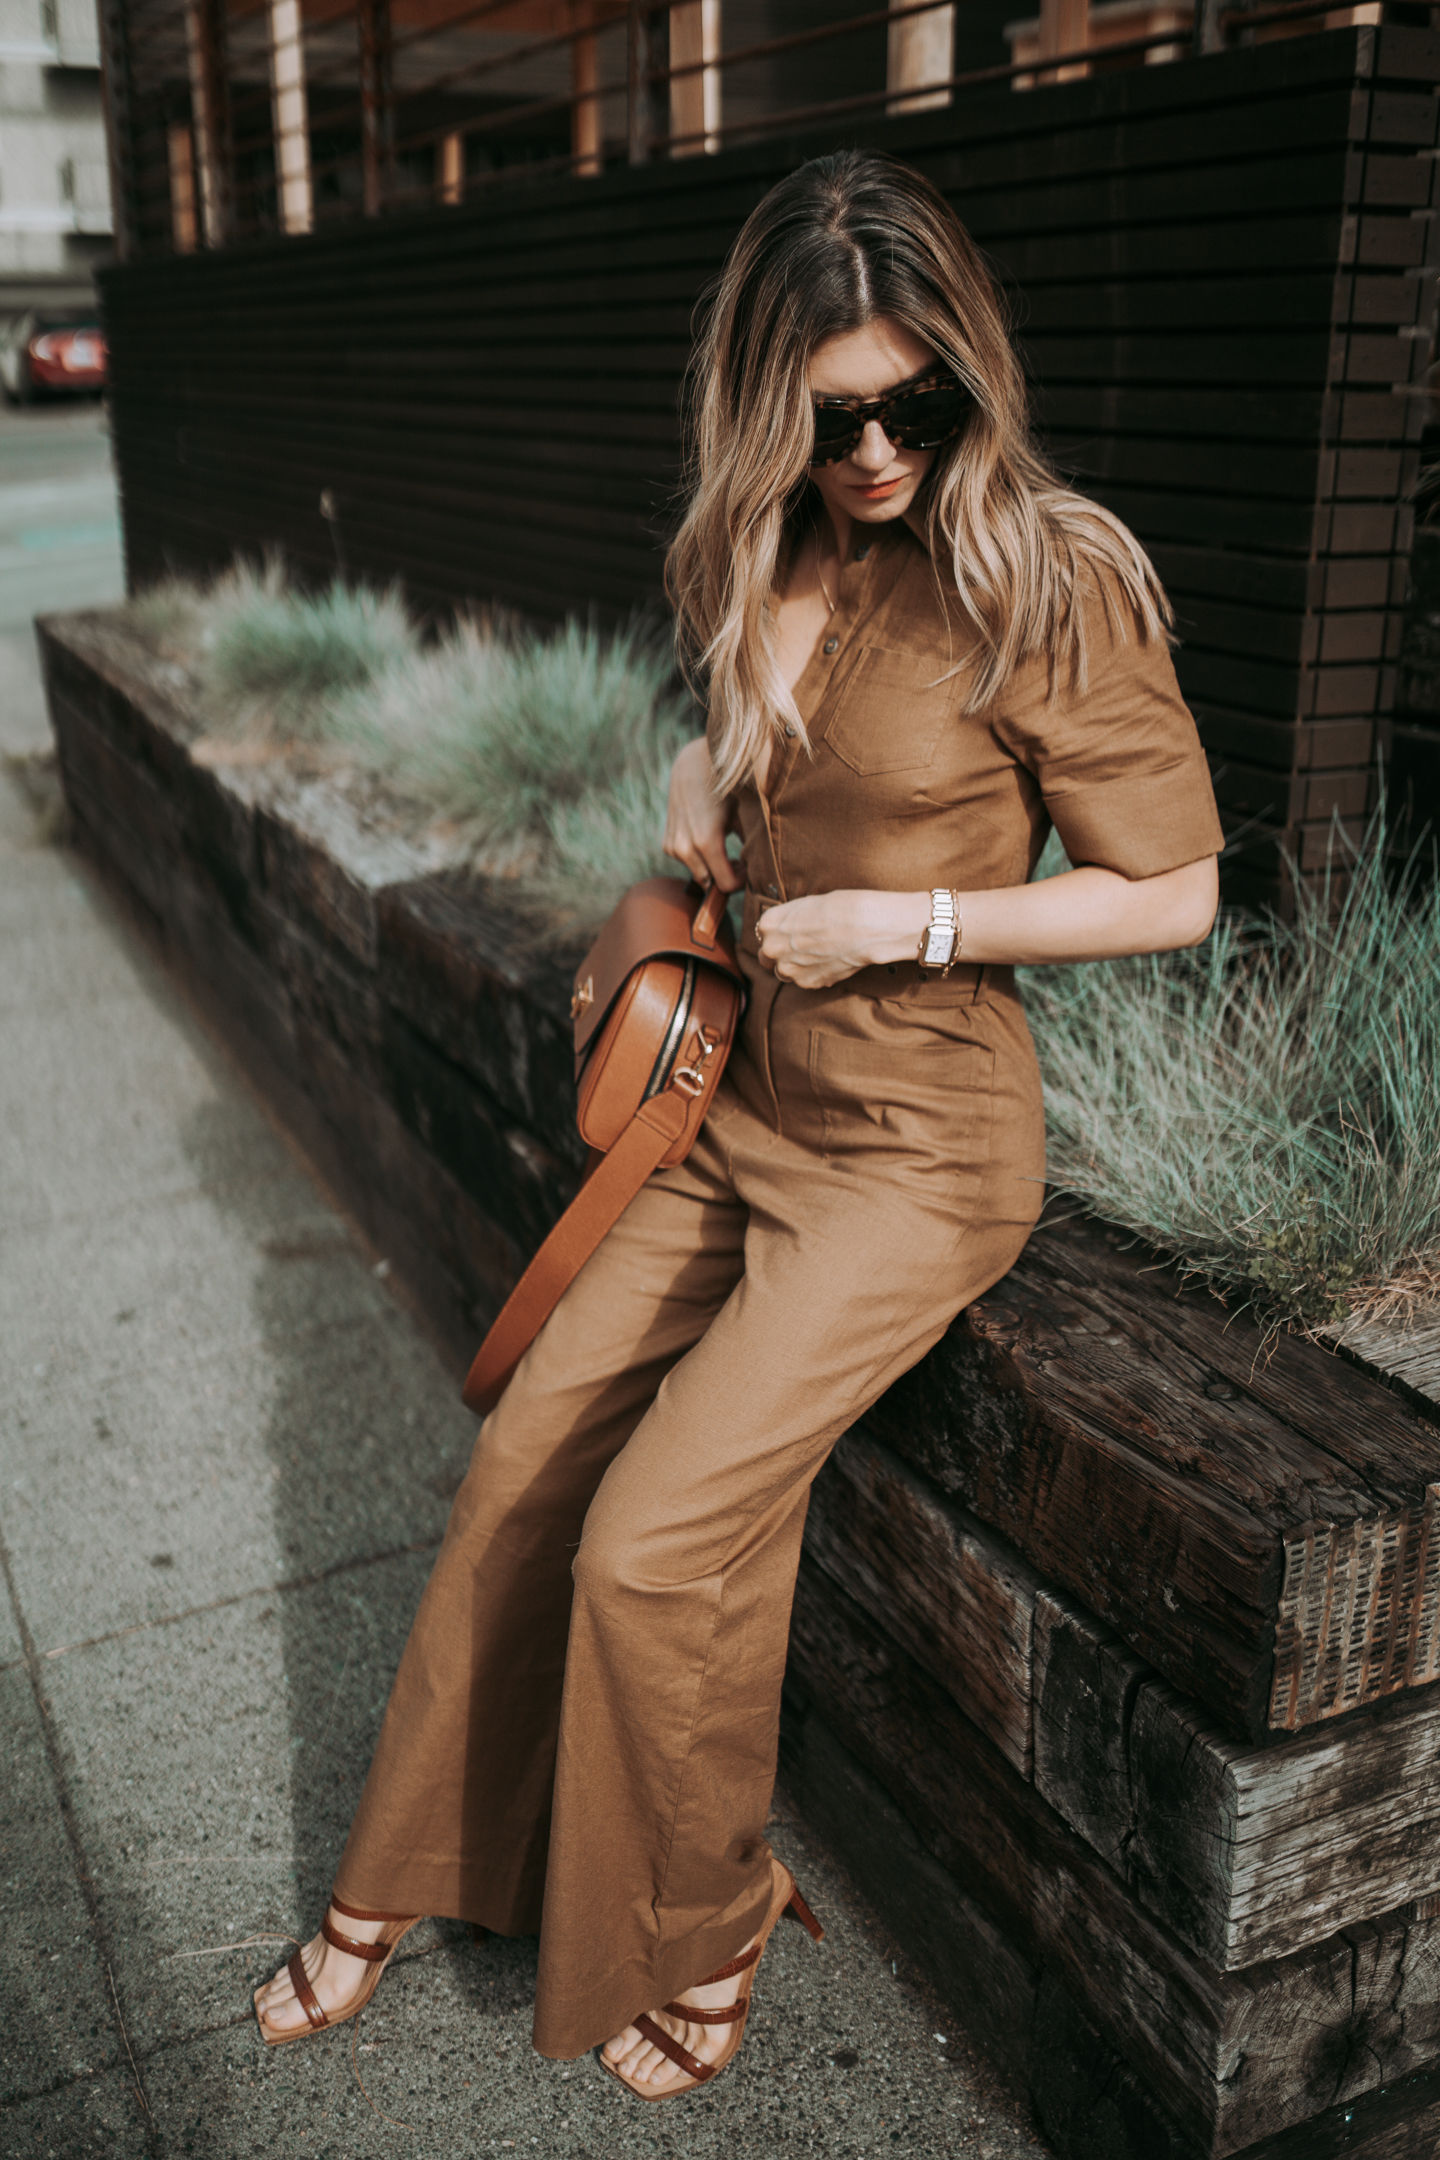 The Grey Edit - Cortney Bigelow - Seattle Lifestyle Blogger _ Stylelogue June Issue - Safari Trend - Summer Styling